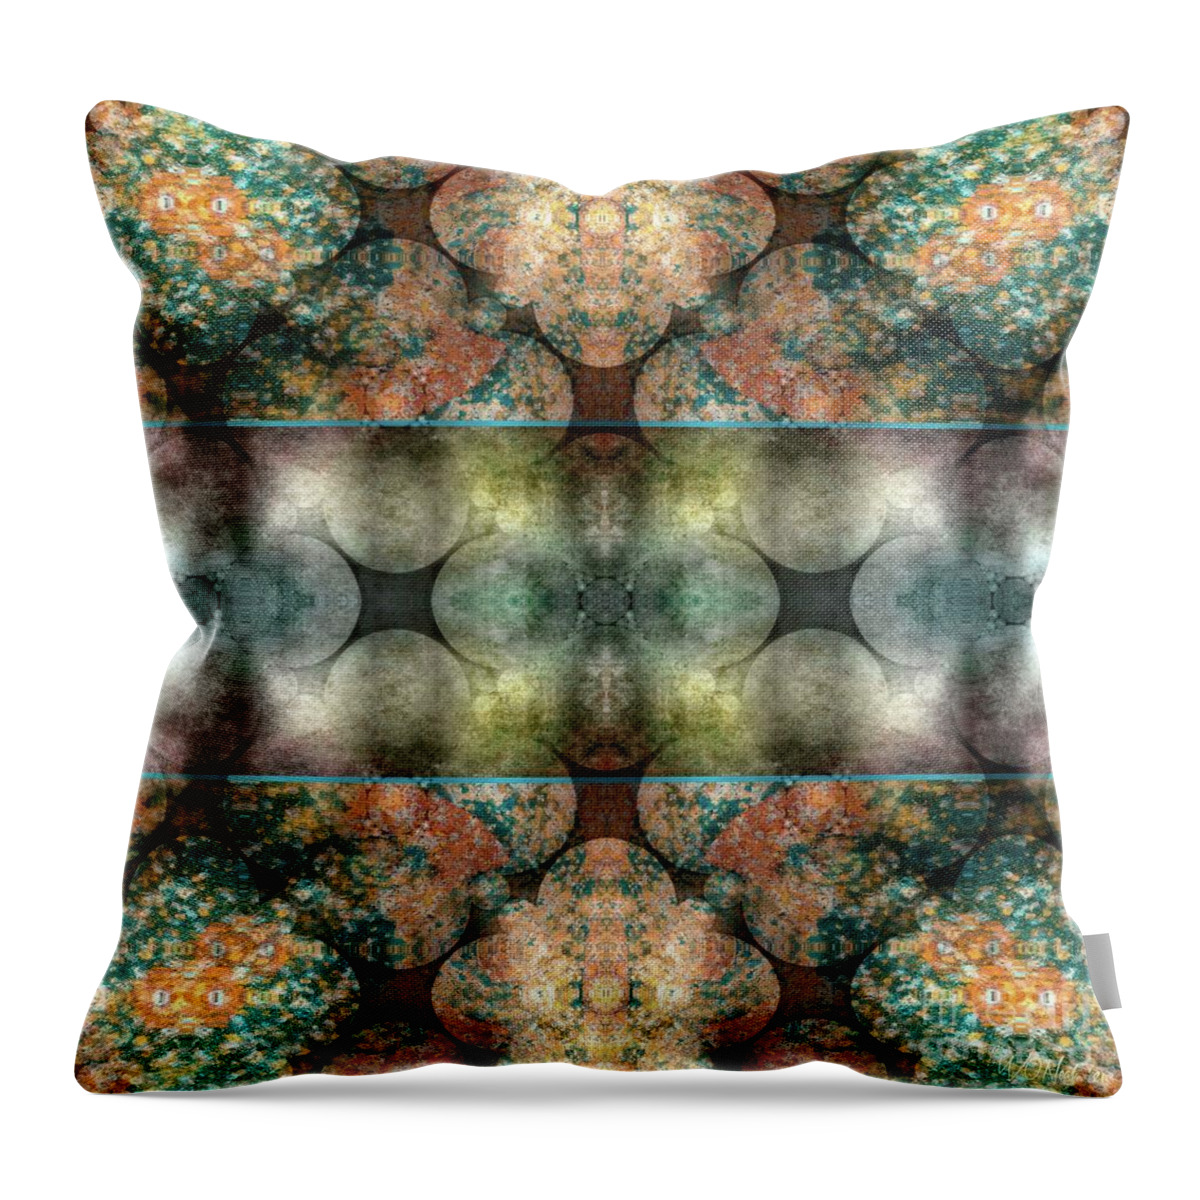 Abstract Throw Pillow featuring the digital art Interlude, No. 2 by Walter Neal